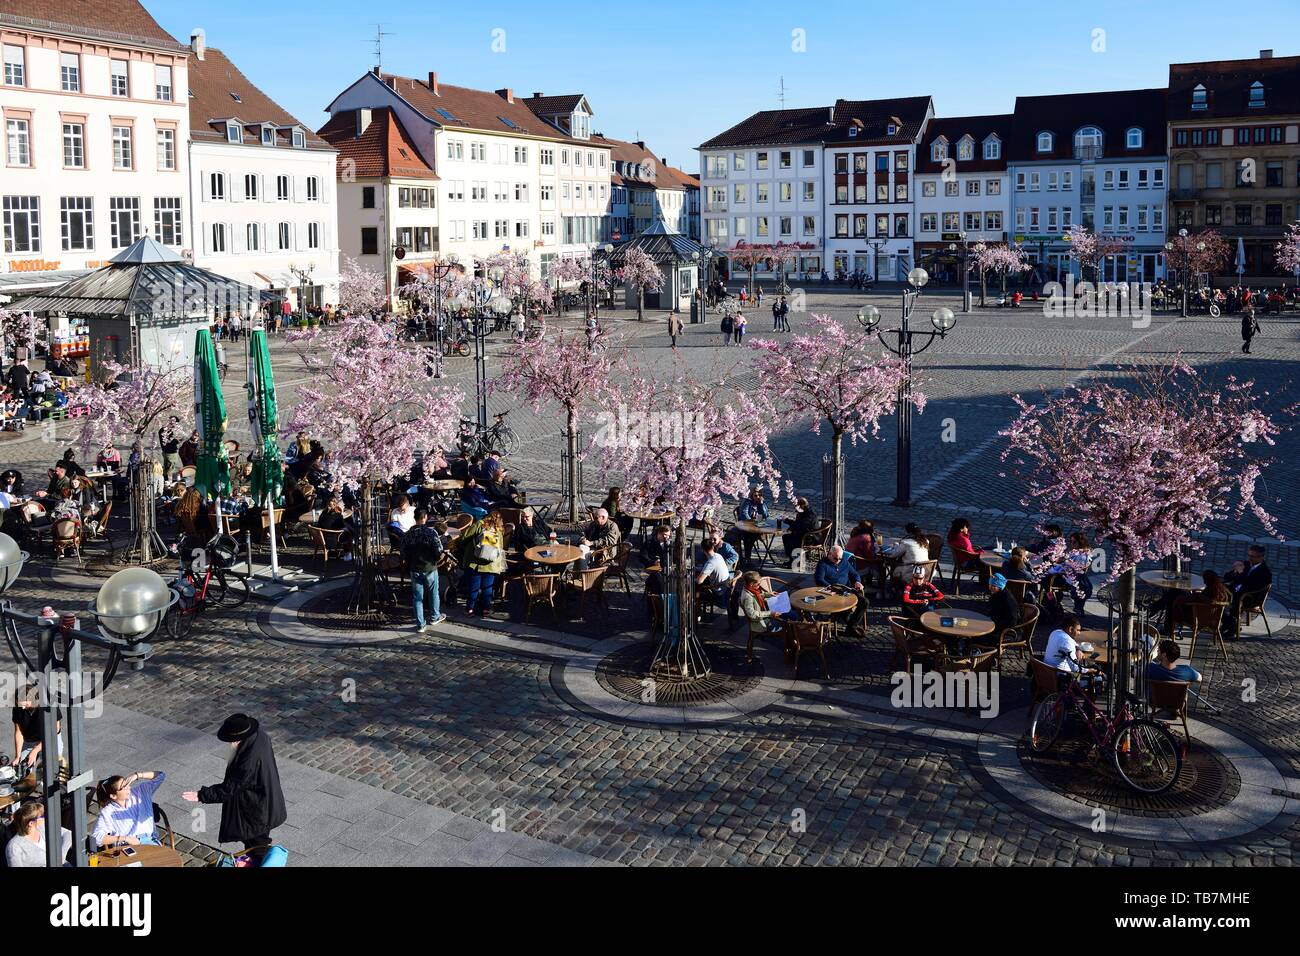 Town square with blossoming almond trees, Landau in der Pfalz German Wine  Route, Rhineland-Palatinate, Germany Stock Photo - Alamy